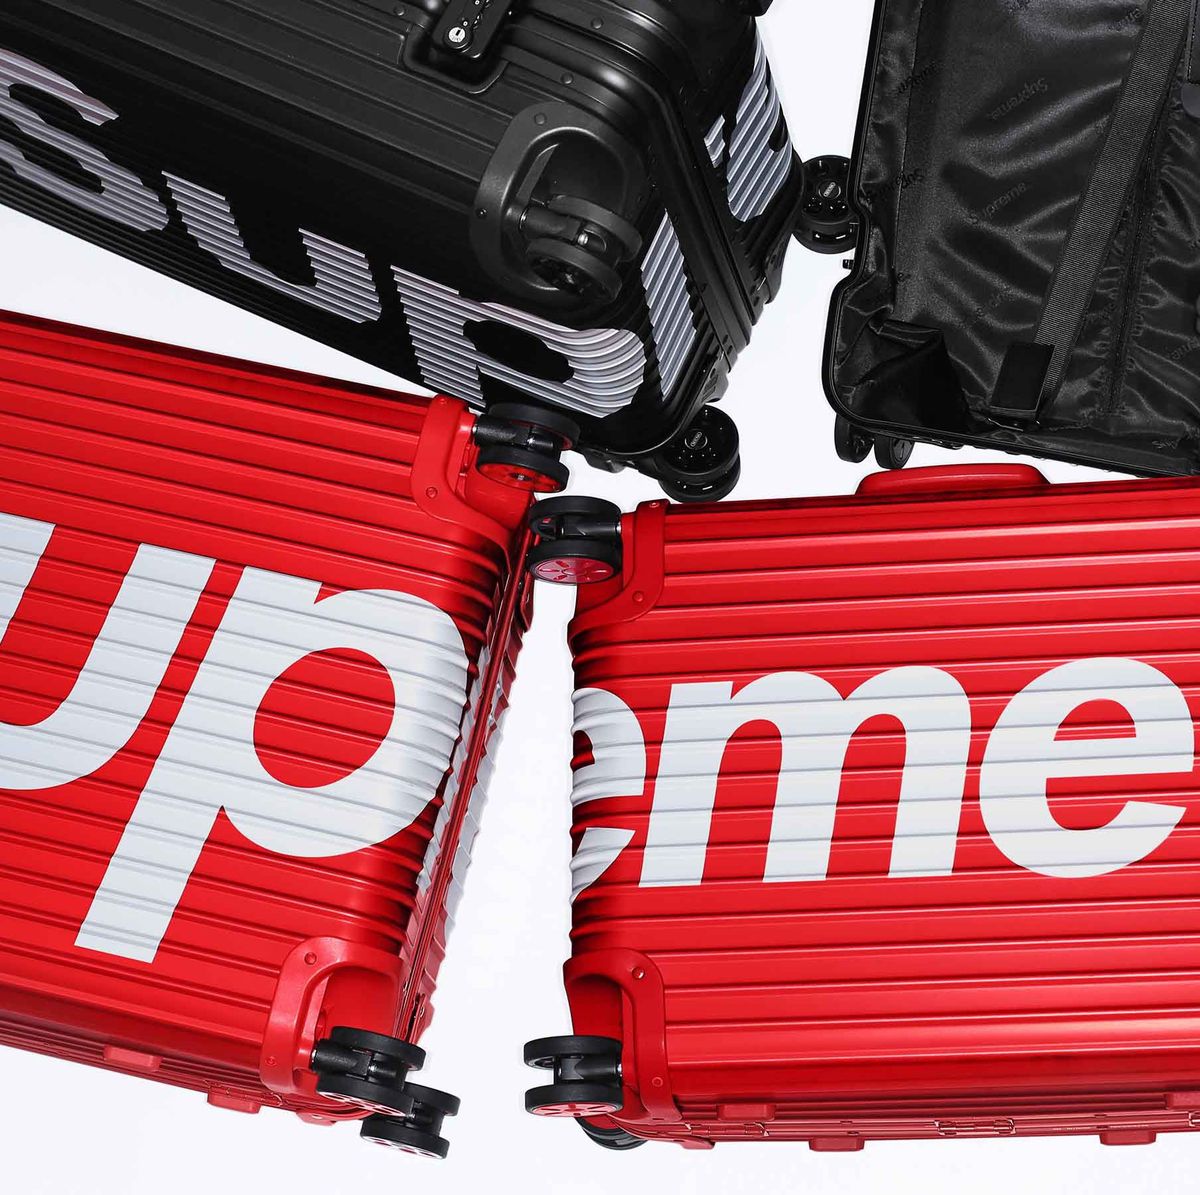 Supreme teases collaboration with luggage-brand giant Rimowa